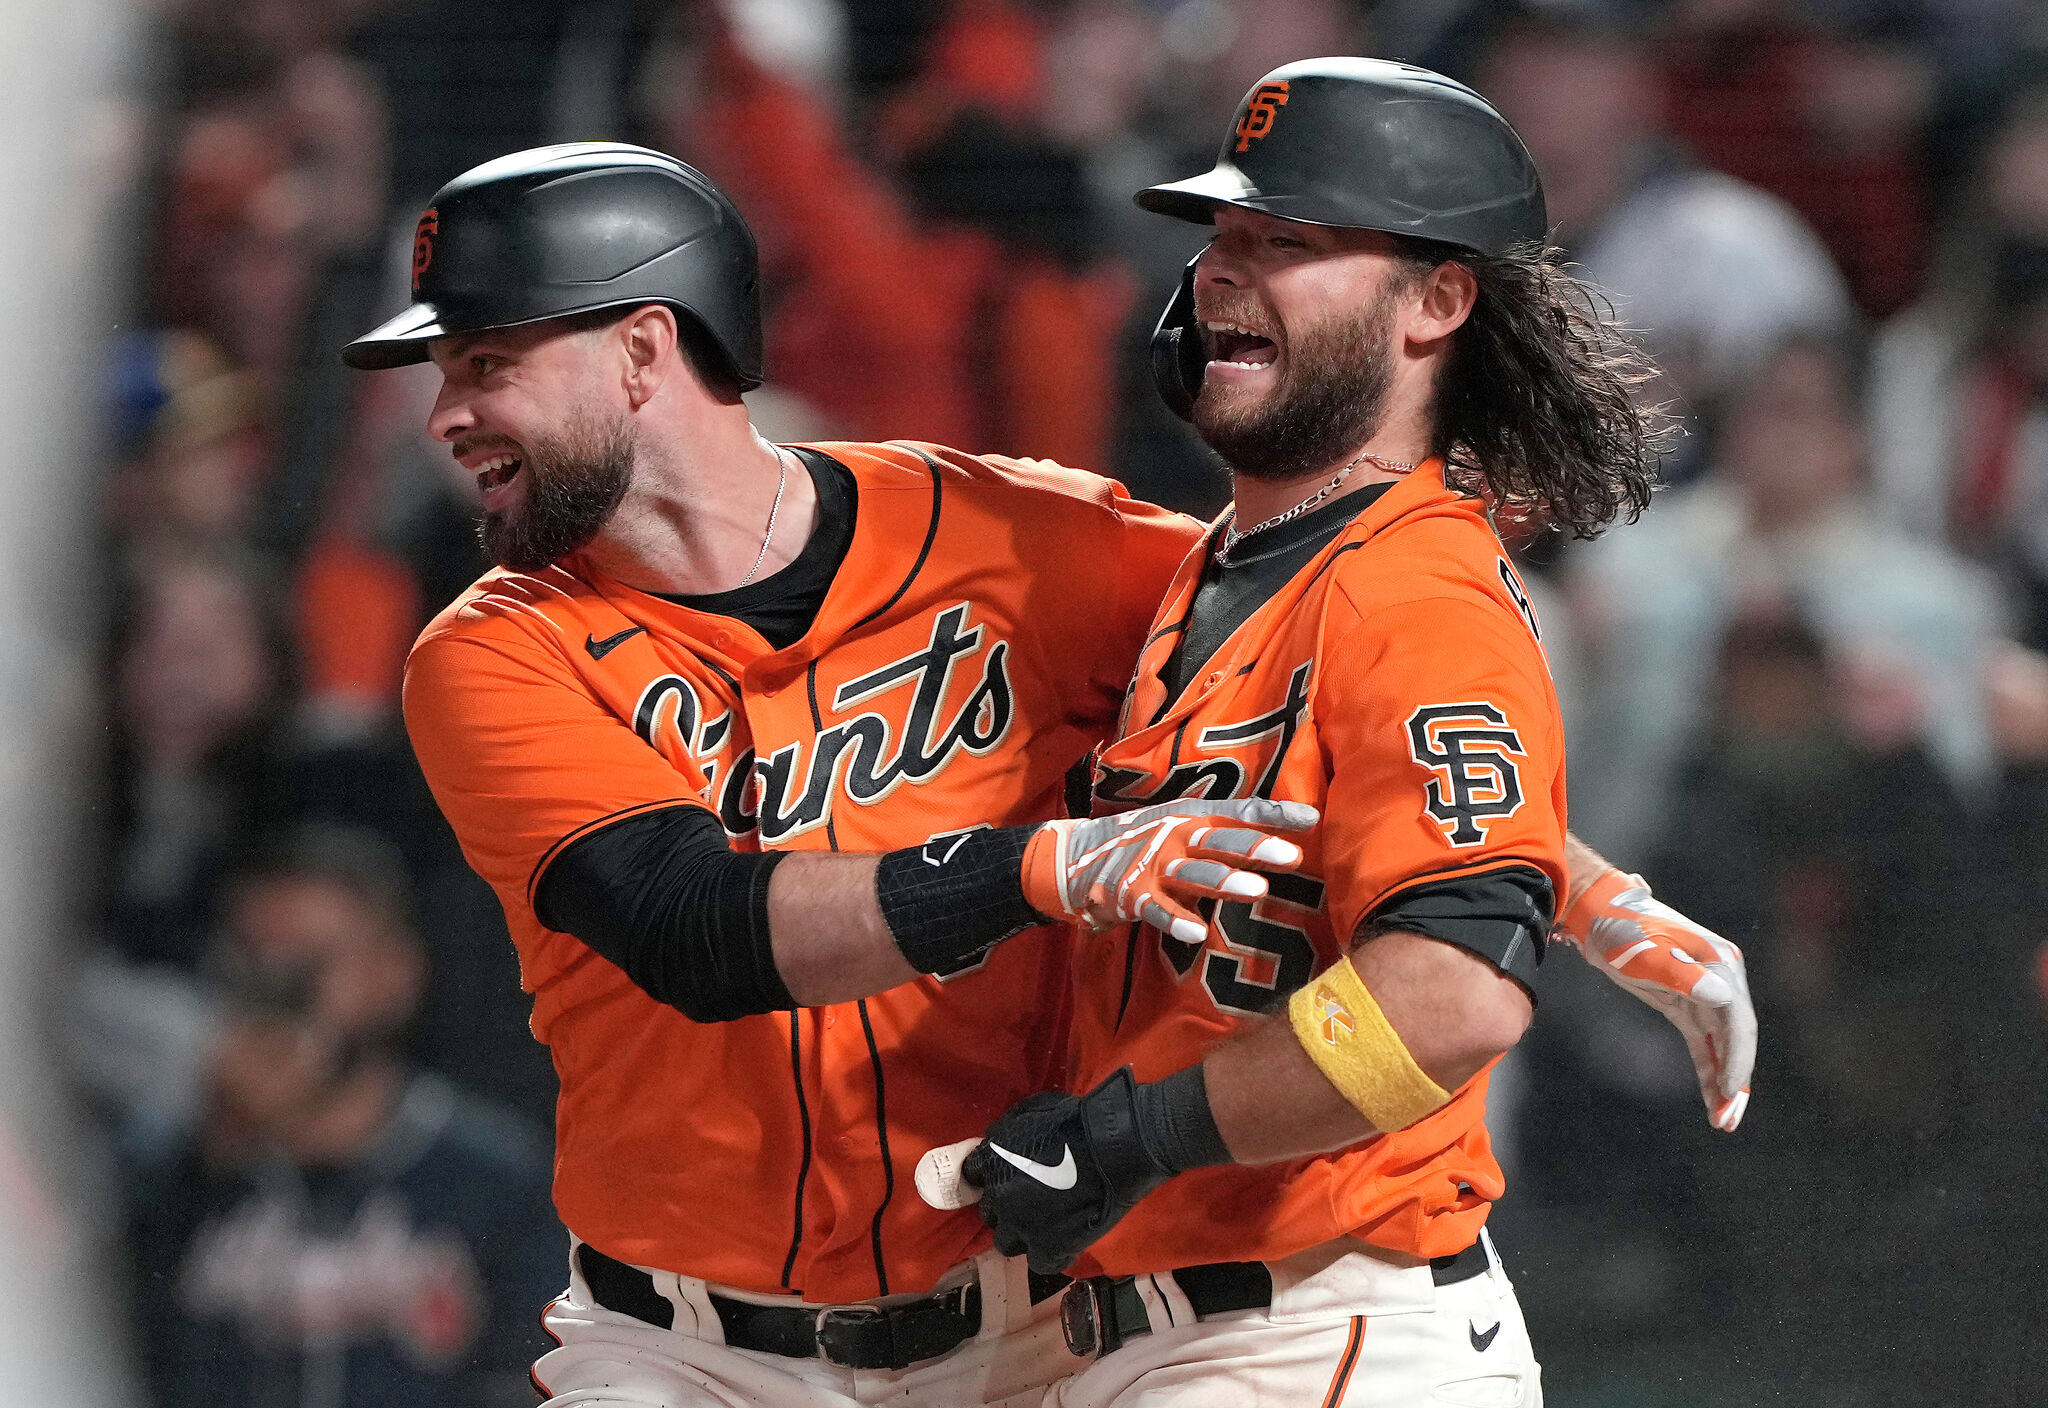 Of course Brandon Belt homered as SF Giants honored Brandon Crawford